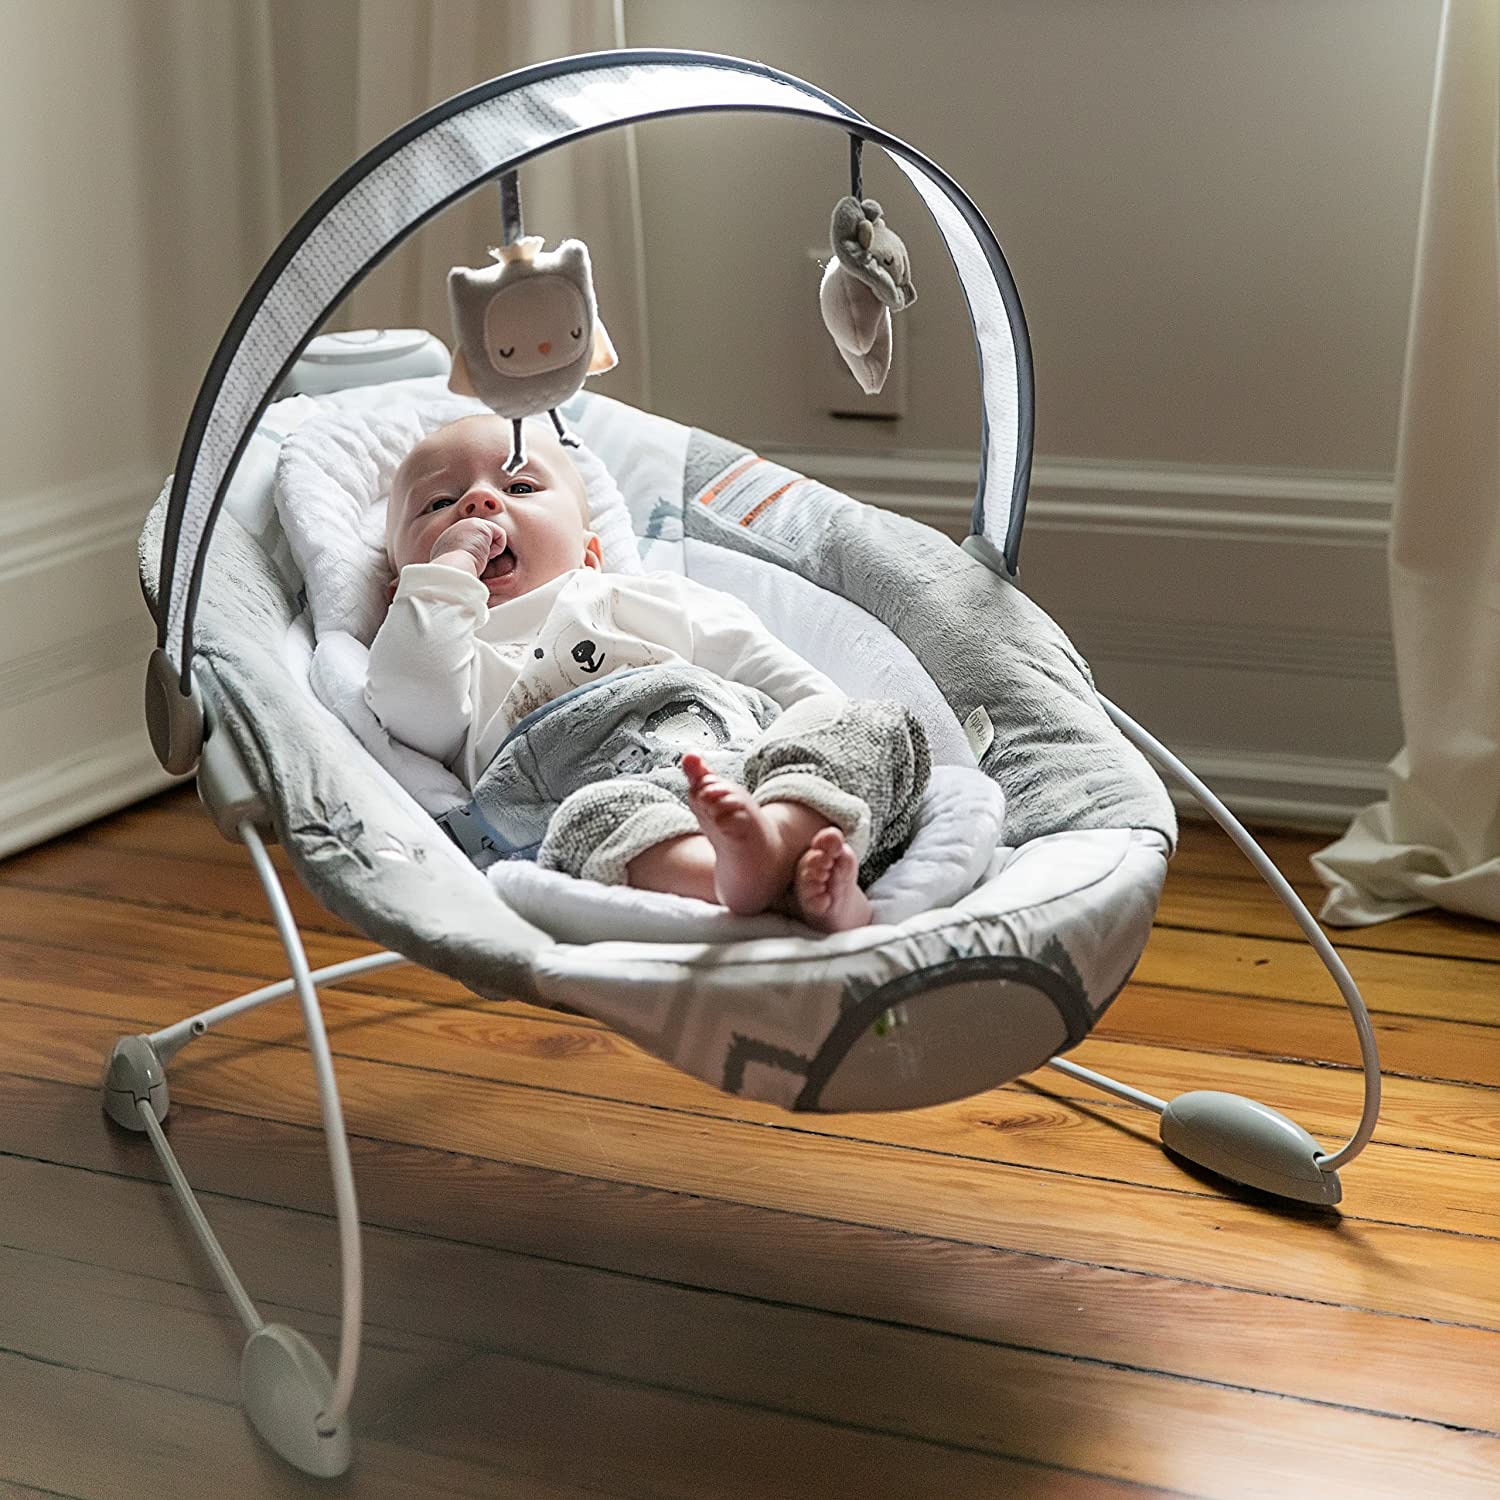 Ingenuity, automatic baby bouncer